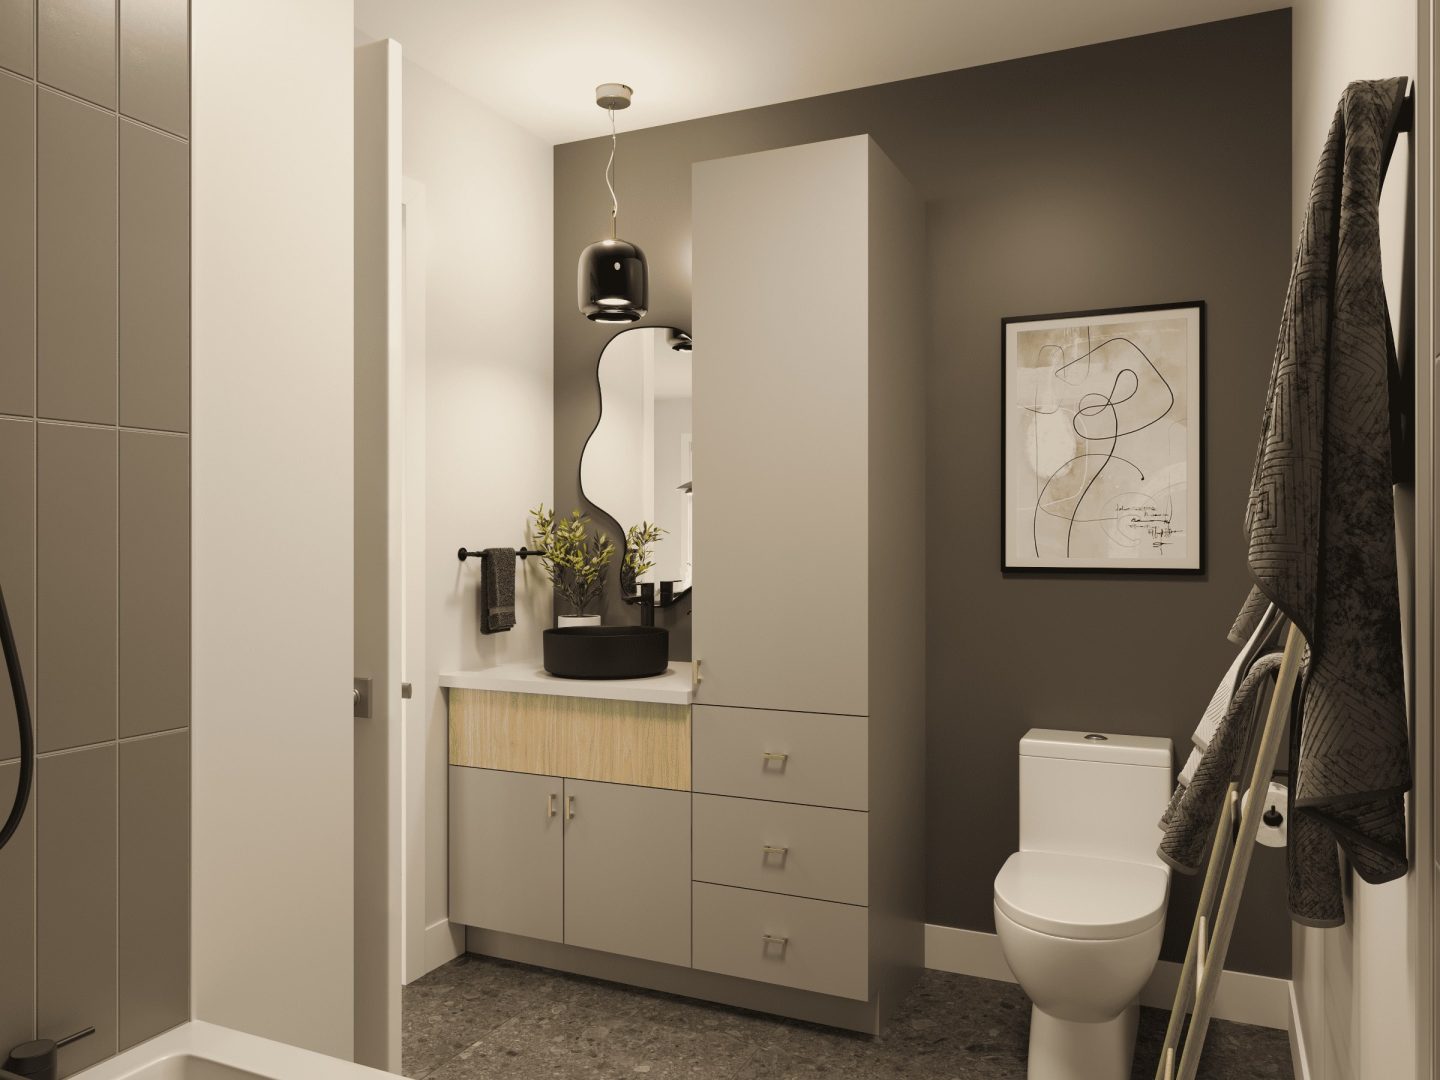 The Pixie model is a contemporary single-storey home. View of the bathroom